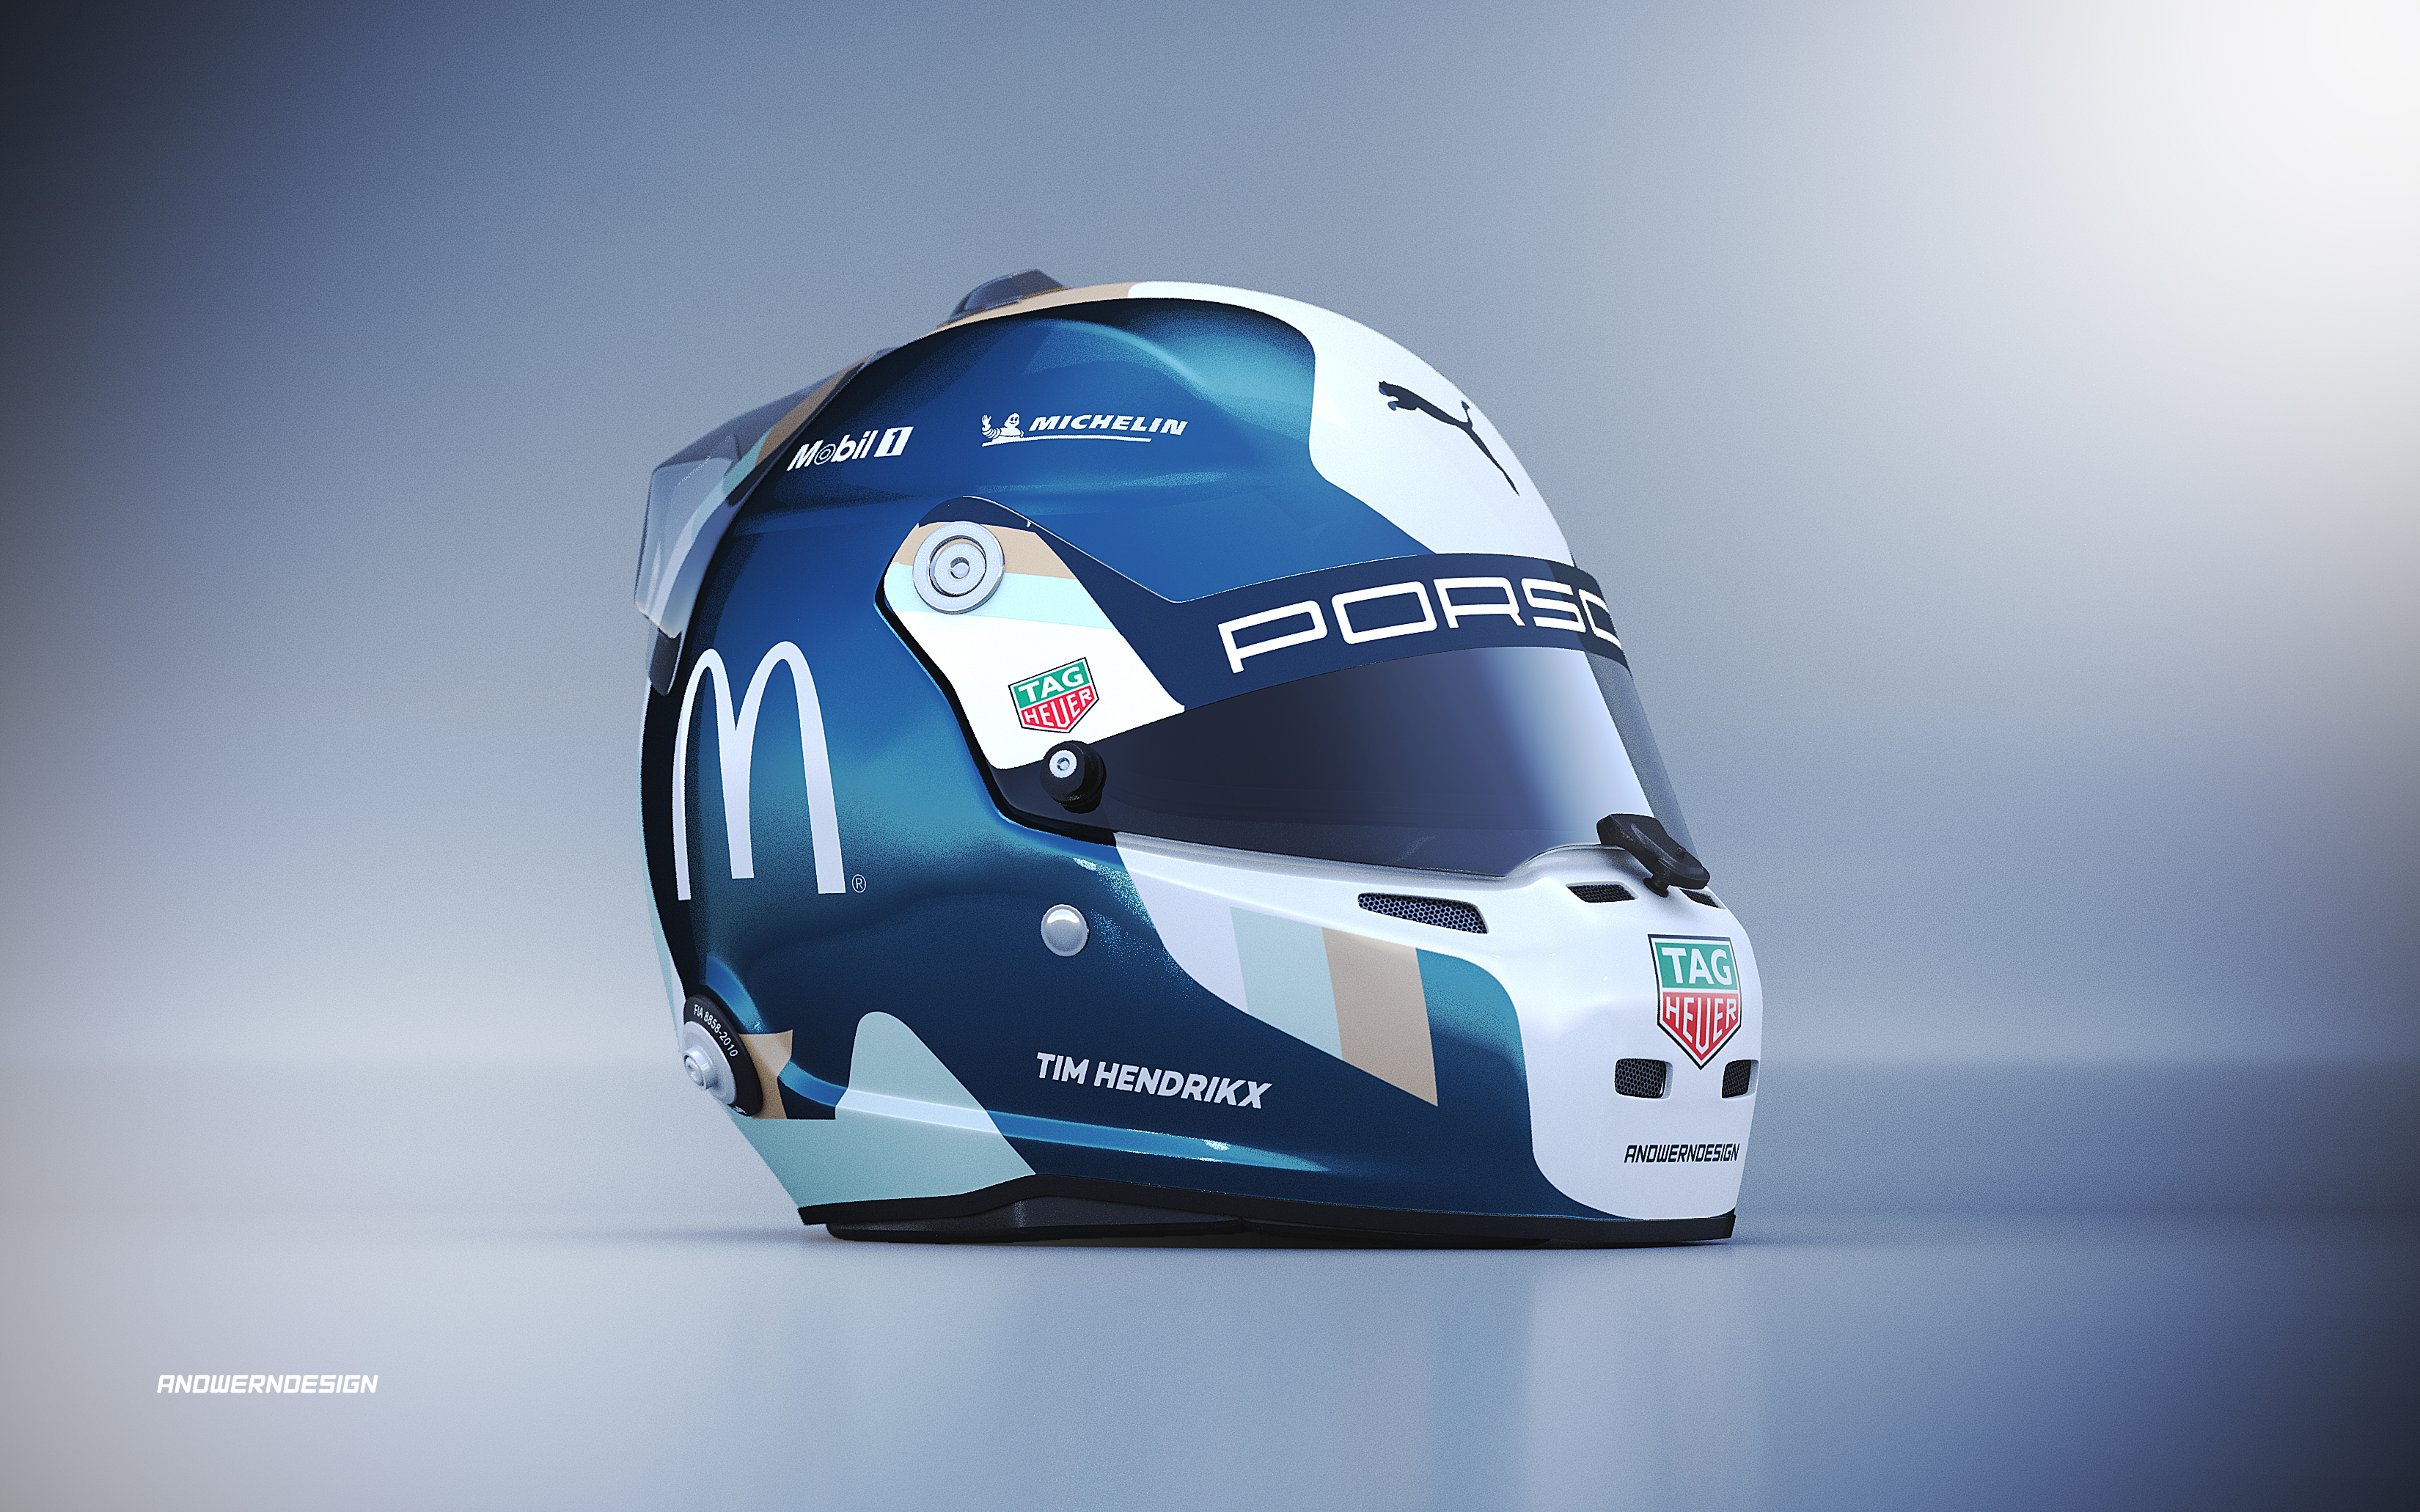 Porsche branded race helmet with geometric design by Andy Werner